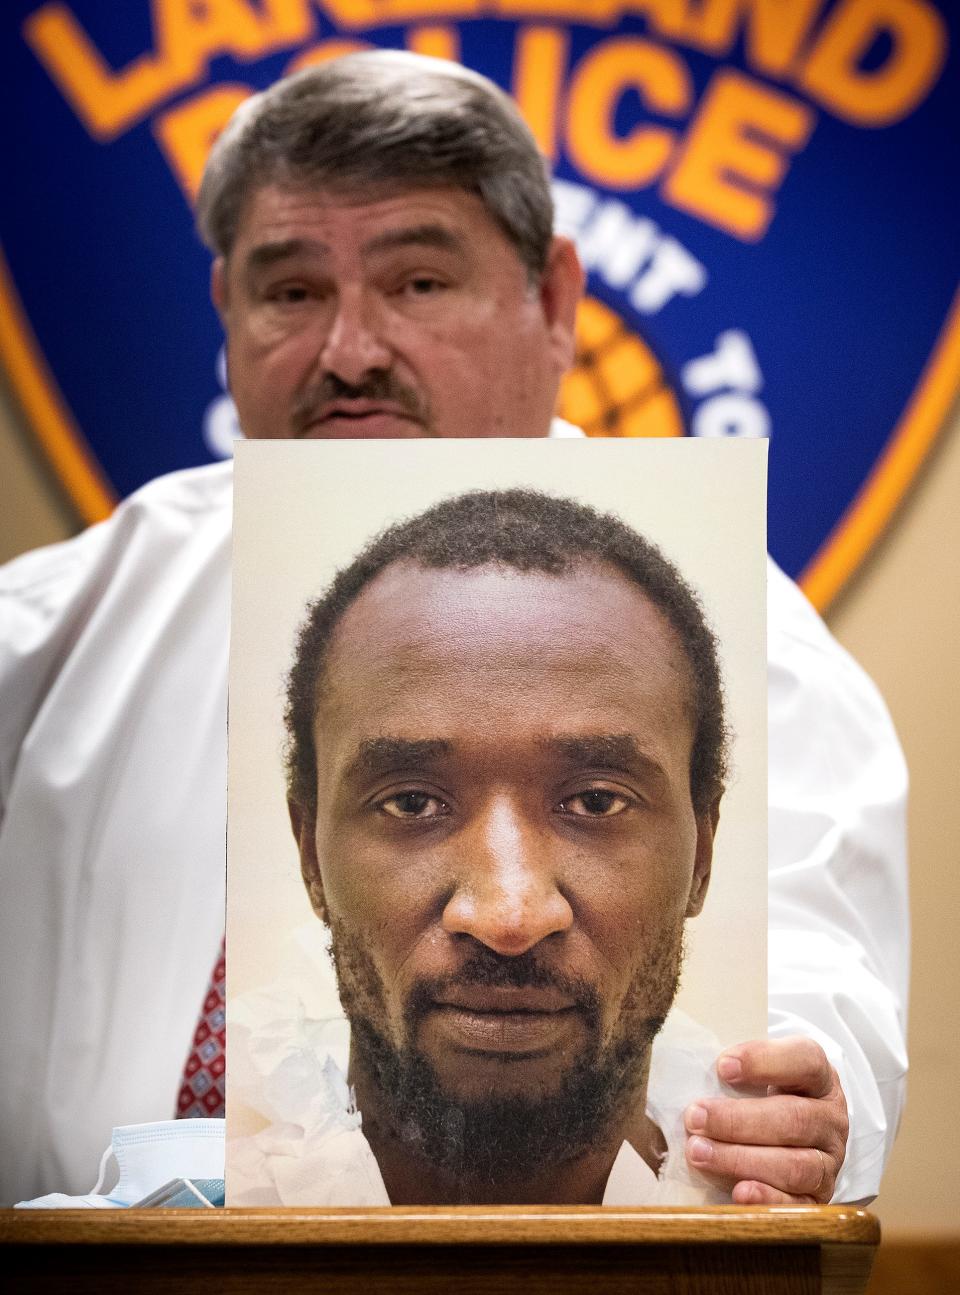 Lakeland Assistant Chief Of Police Sam Taylor holds up a photo of Marcelle Waldon, who was arrested and charged with 10 felony counts in the murder of Edith Henderson and her husband David Henderson, during a press conference at Lakeland Police Department headquarters on Nov. 12, 2020. Former City Commissioner Edith Henderson, also known as Edie Yates, 67, and her husband David Henderson, 64, were found dead in their home on Lake Morton.